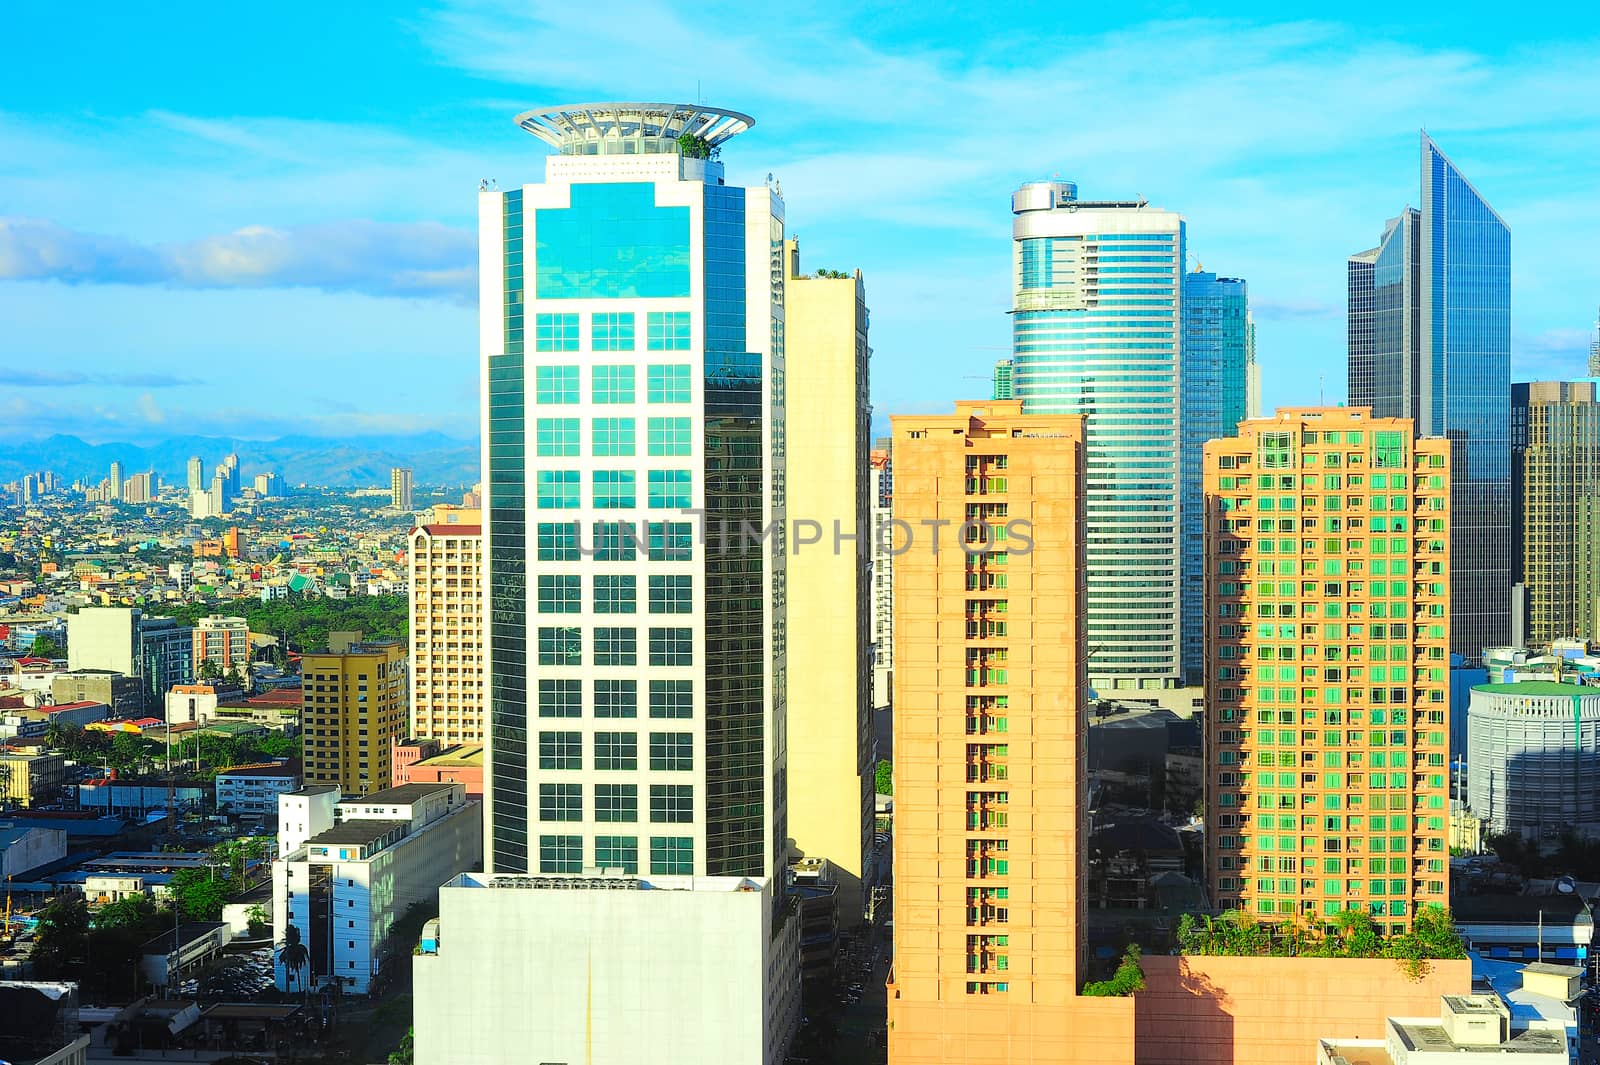 View of Makati city - modern financial and business district of Metro Manila, Philippines
